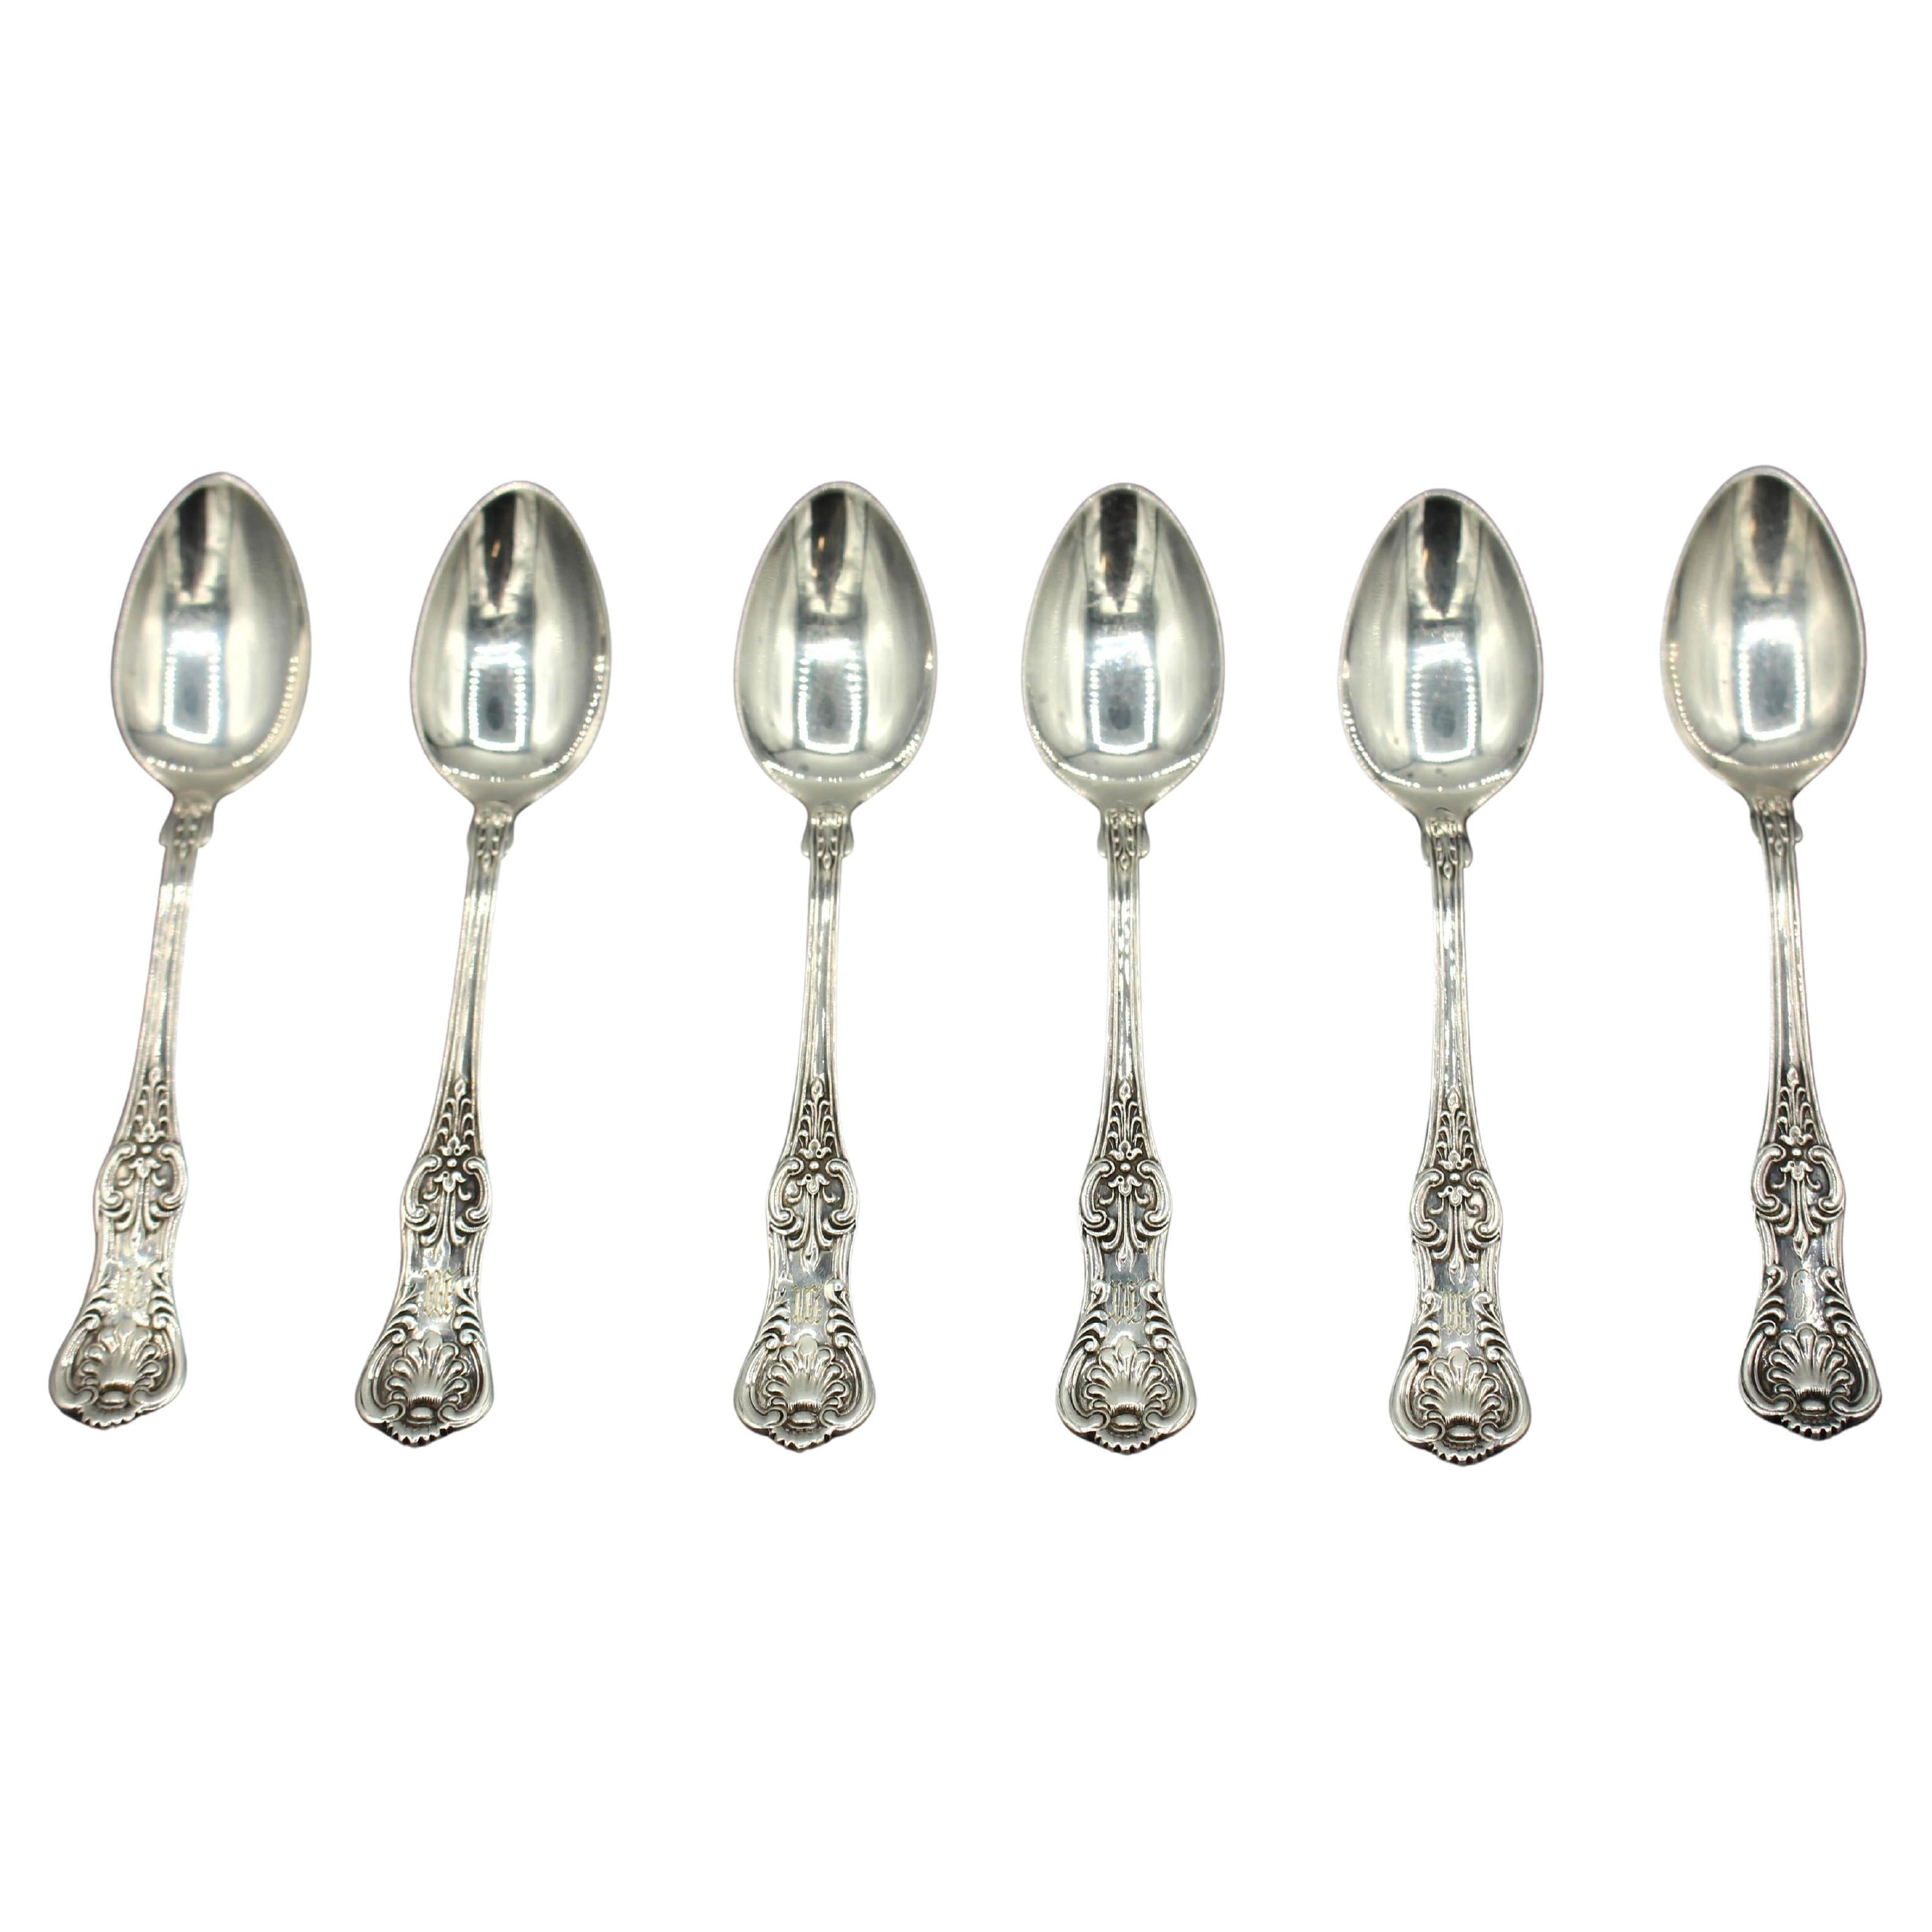 Set of 6 "King" Pattern Sterling Silver Demitasse Spoons, Circa 1900 For Sale